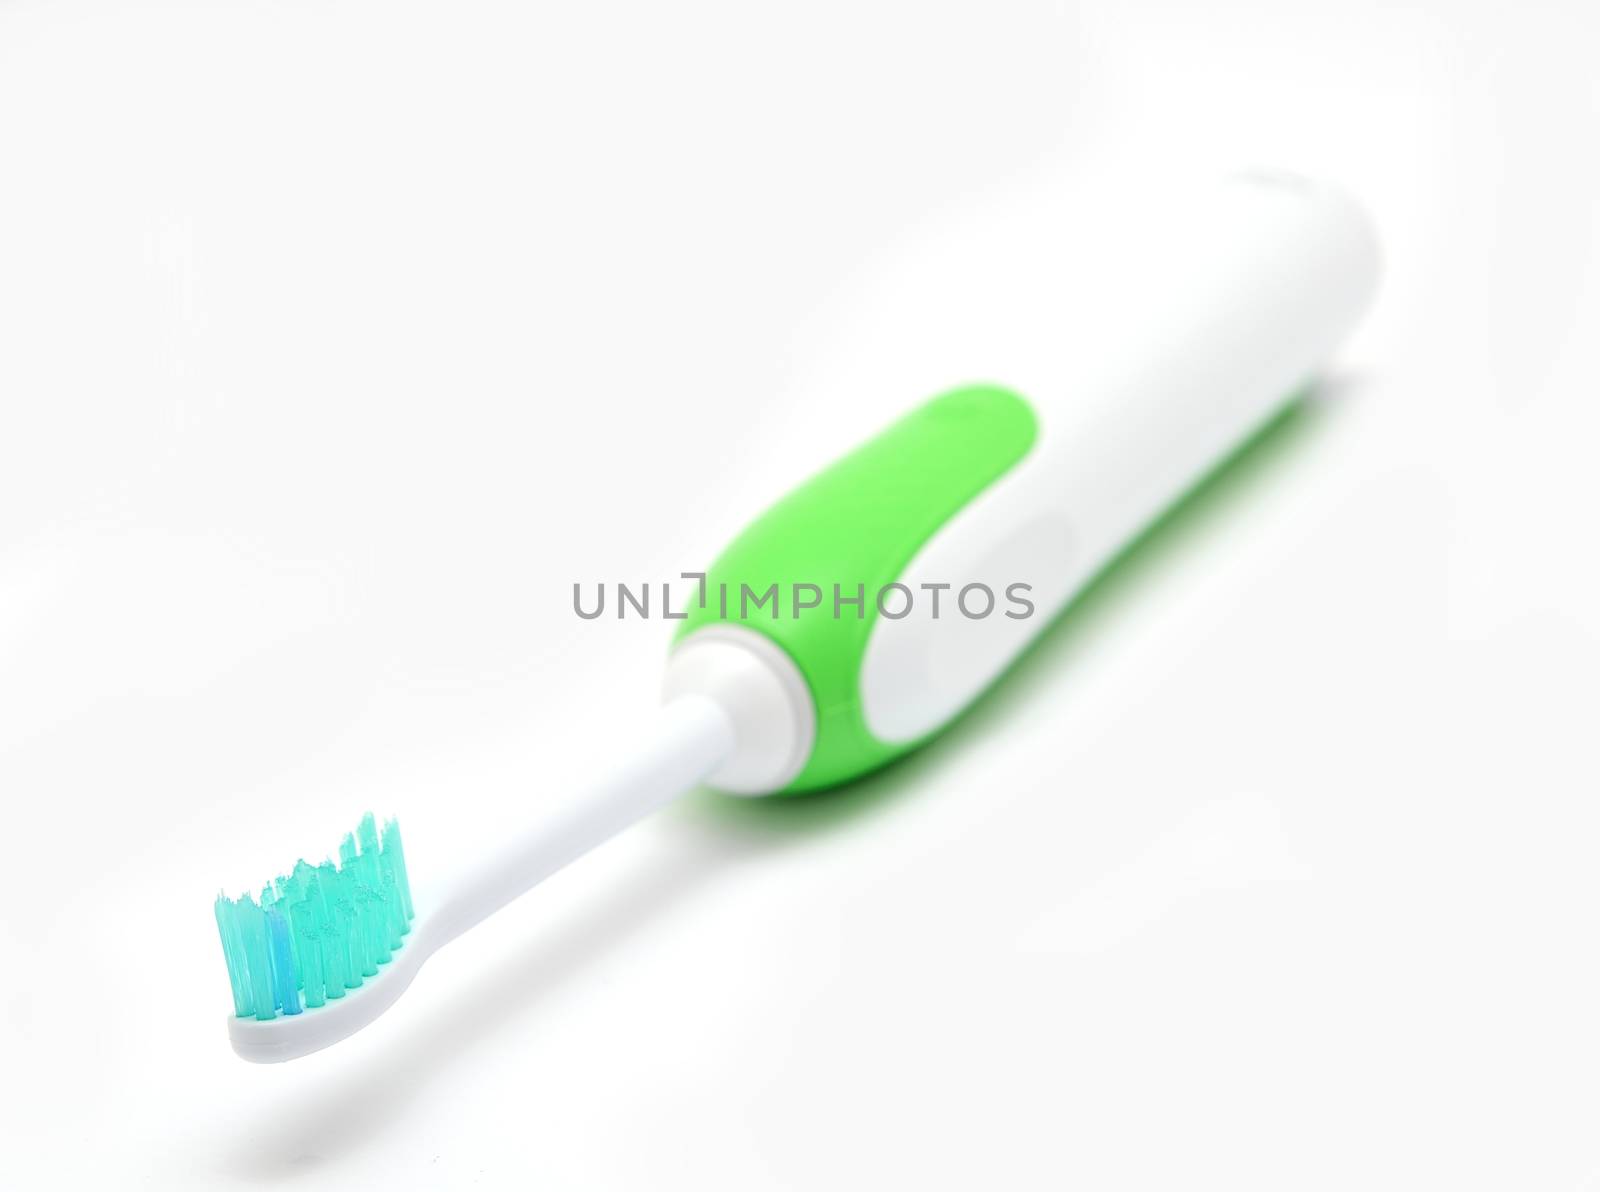 Electric toothbrush by hamik